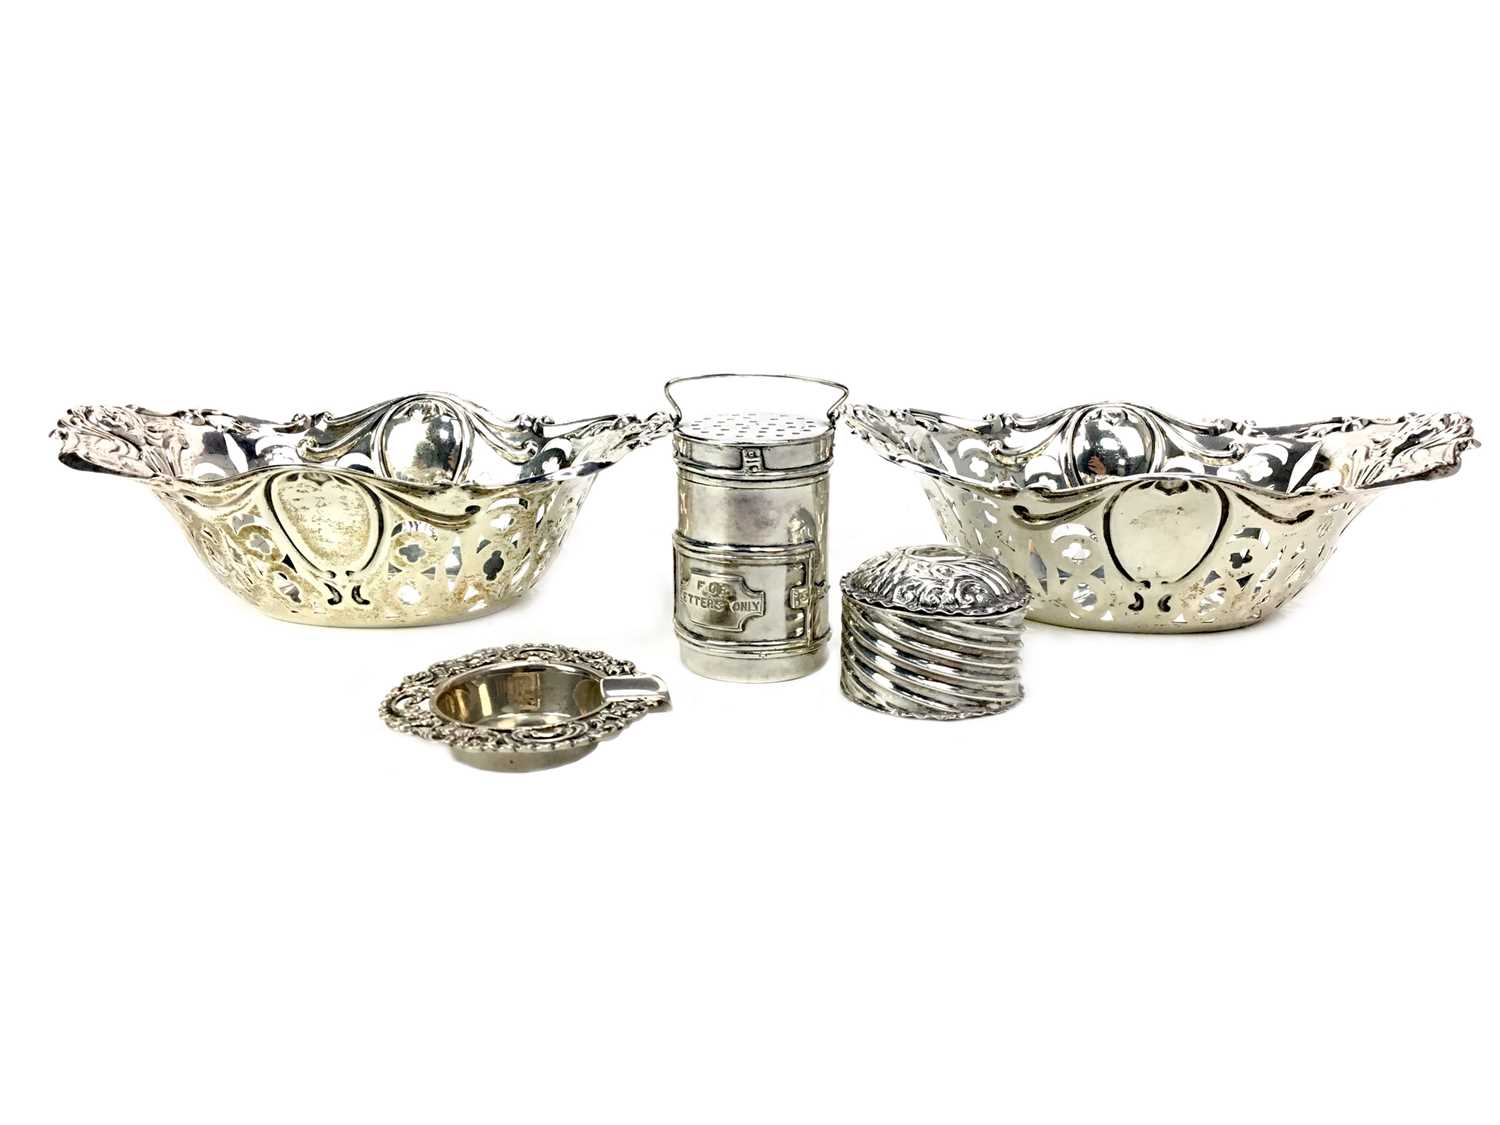 Lot 442 - A PAIR OF EARLY 20TH CENTURY SILVER BONBON DISHES ALONG WITH AN ASHTRAYM PILLBOX AND PEPPERETTE